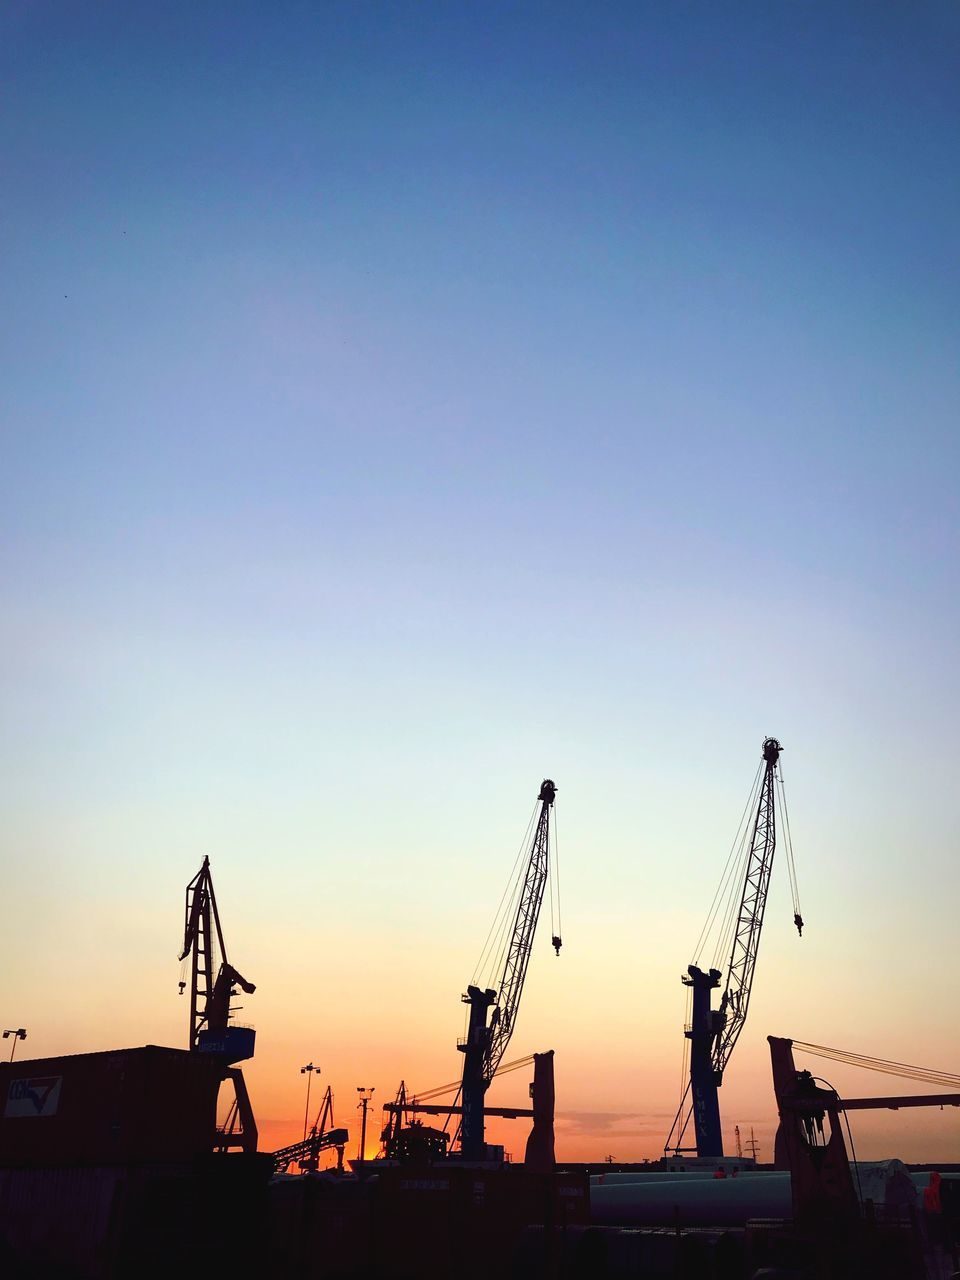 sky, machinery, sunset, crane - construction machinery, industry, clear sky, silhouette, copy space, construction industry, nature, business, freight transportation, development, commercial dock, construction site, crane, architecture, construction equipment, water, no people, outdoors, industrial equipment